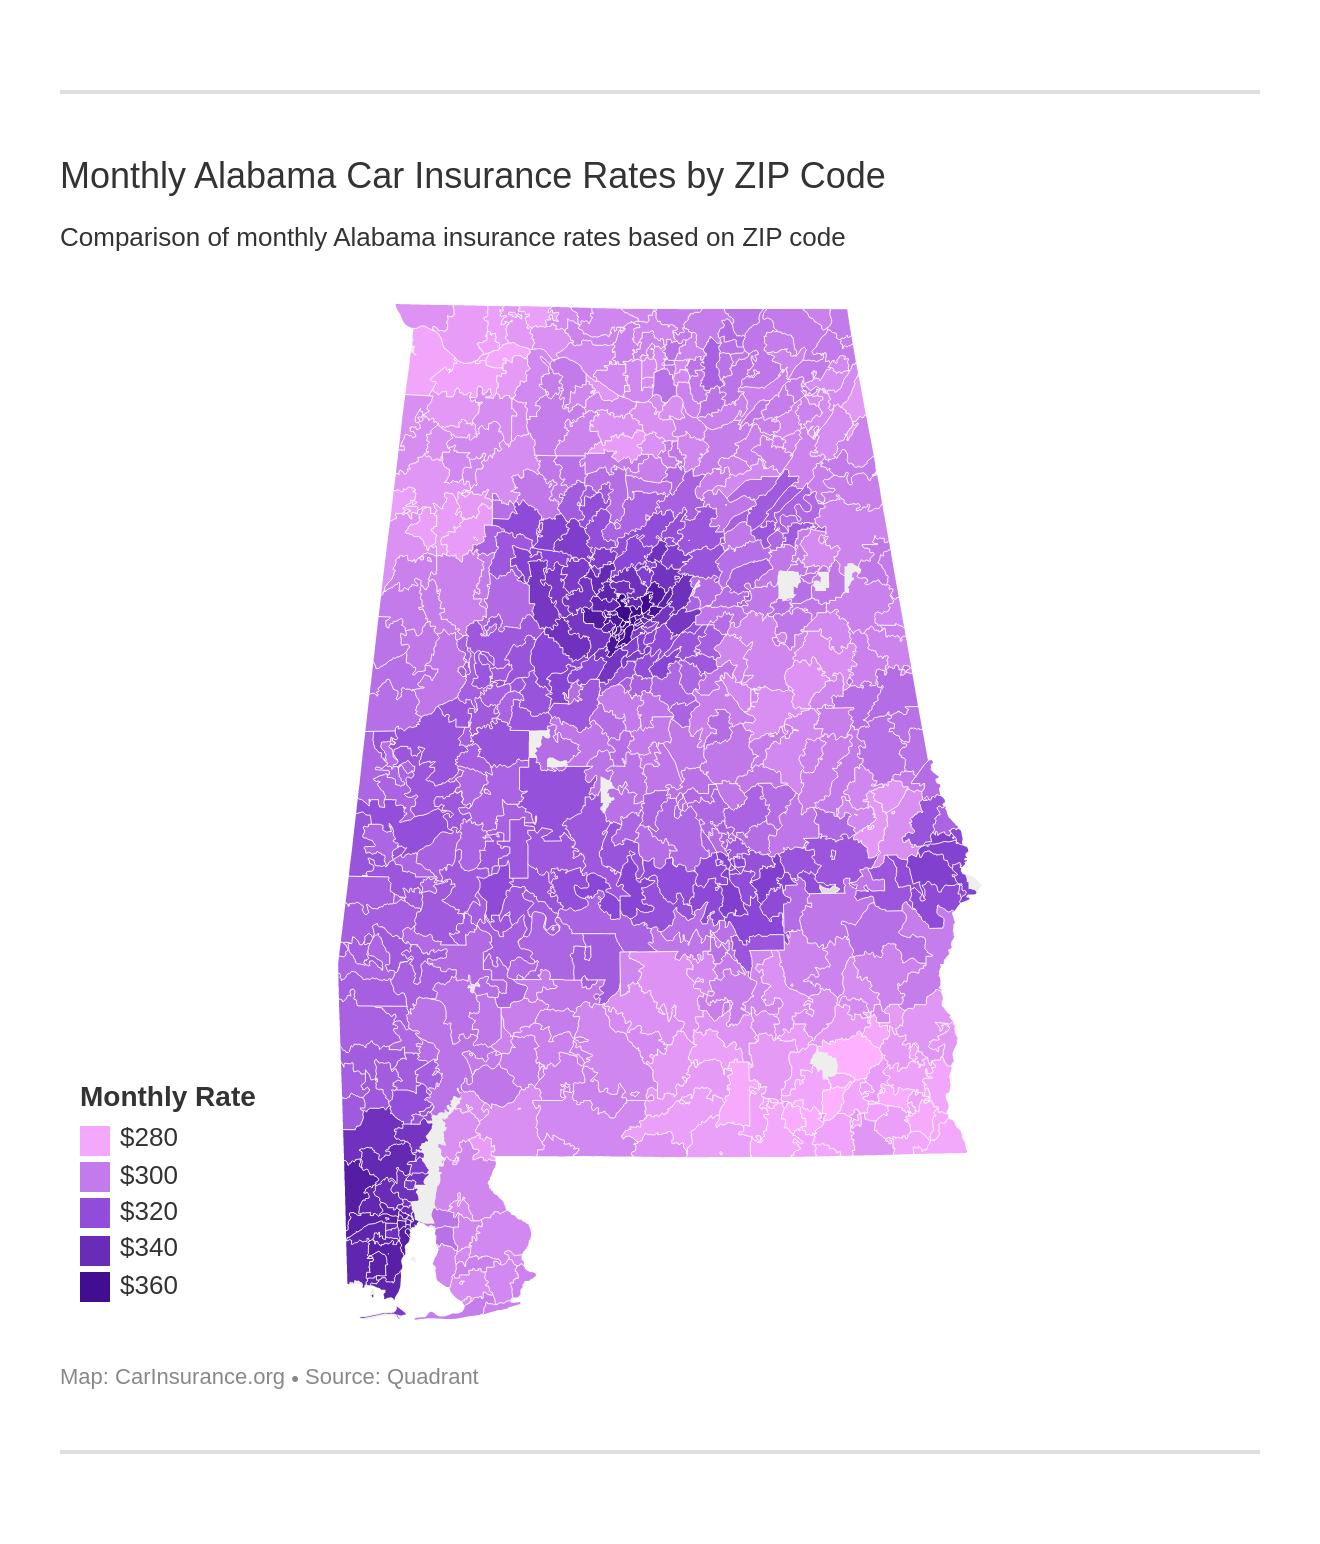 Monthly Alabama Car Insurance Rates by ZIP Code